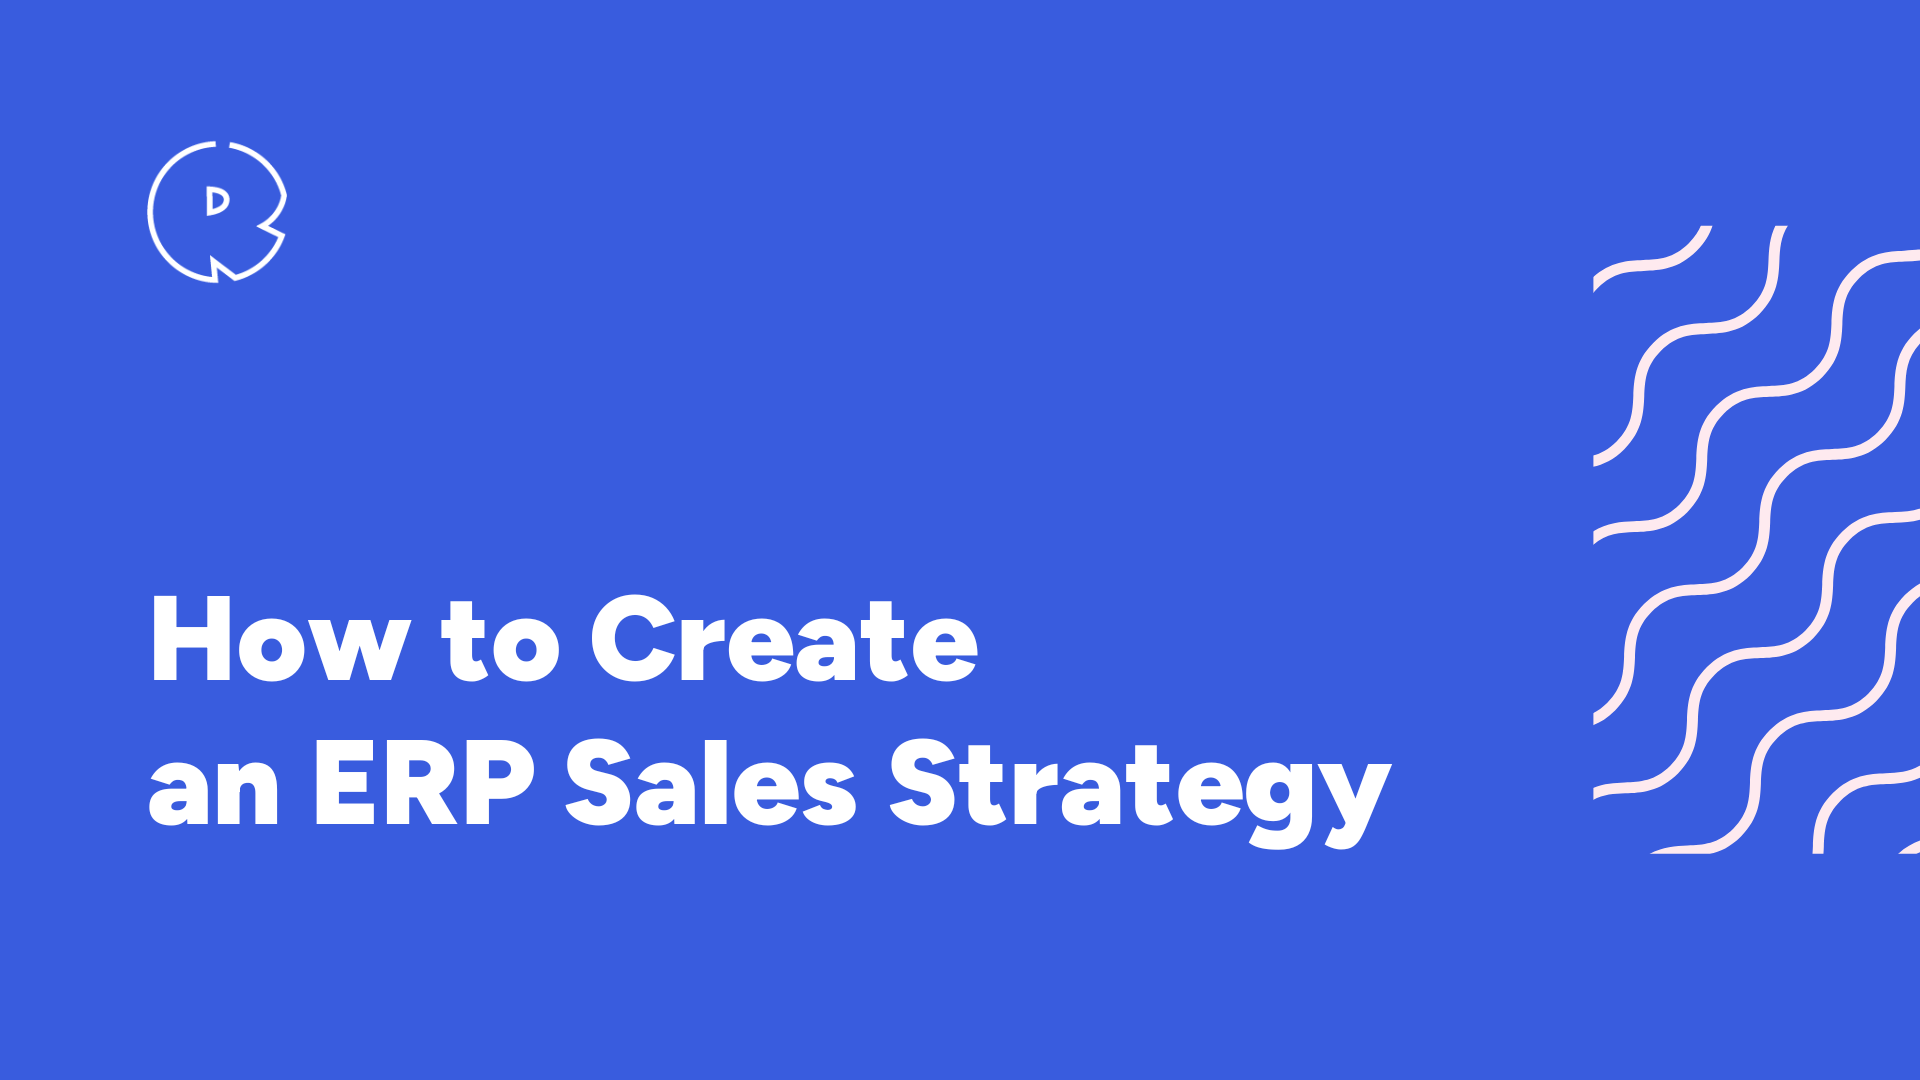 How to Create an ERP Sales Strategy